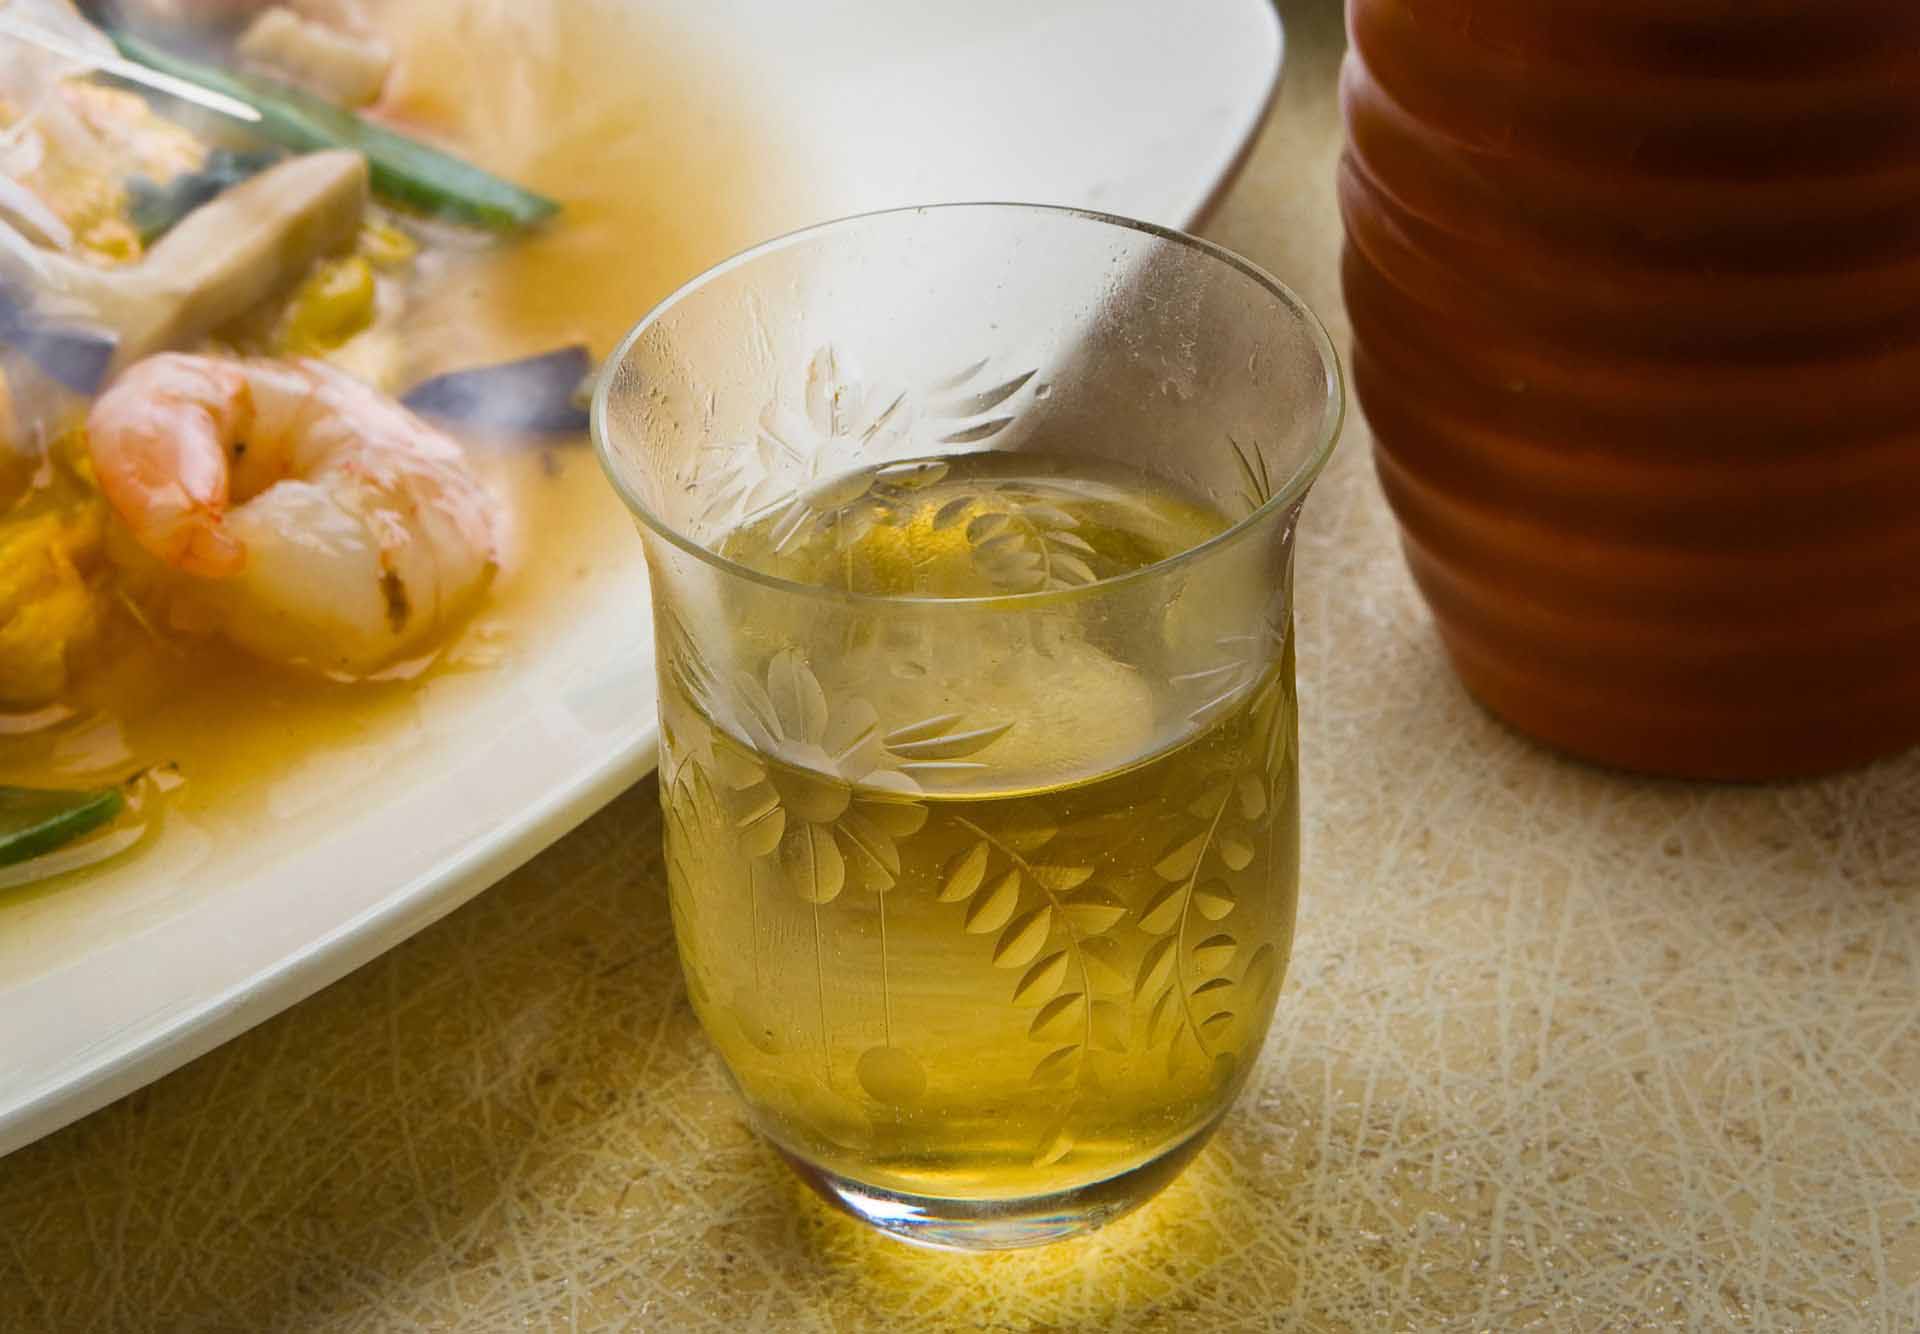 Shaoxing Wine is Essential For True Chinese Cuisine